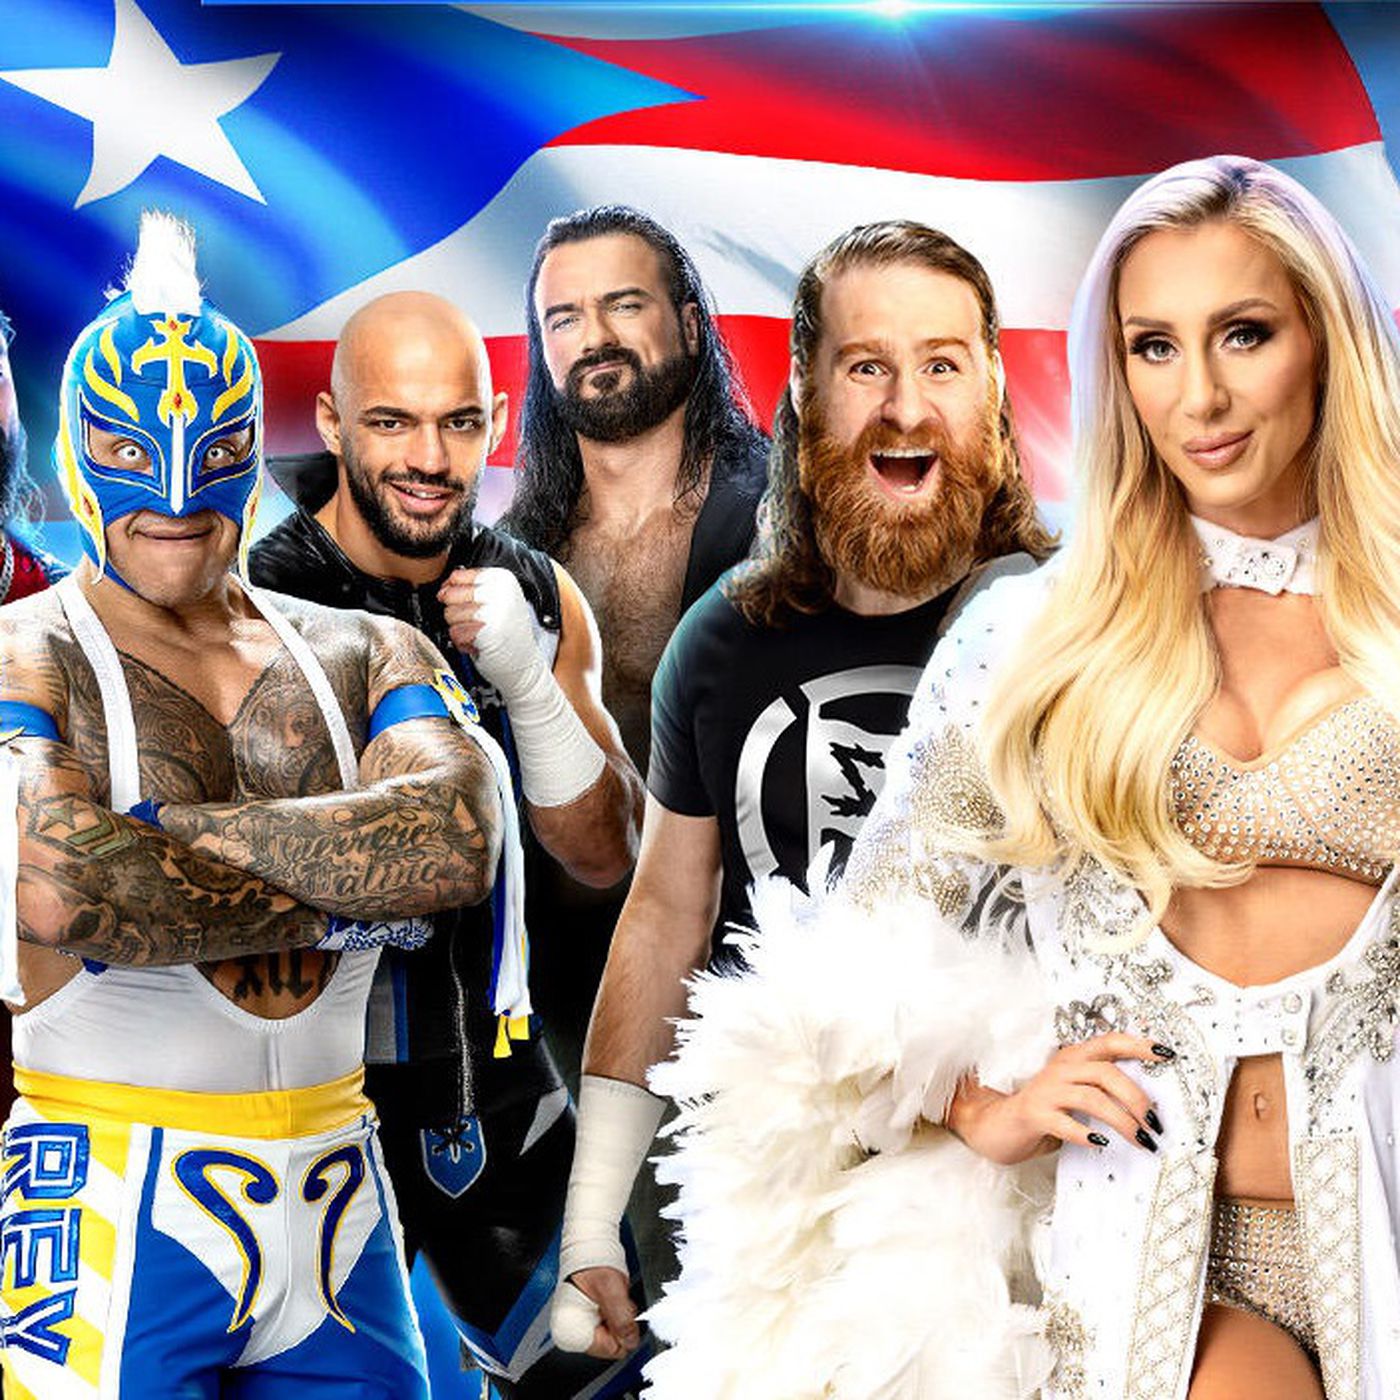 Backlash 2023 isn't the only WWE event coming to Puerto Rico - Cageside Seats